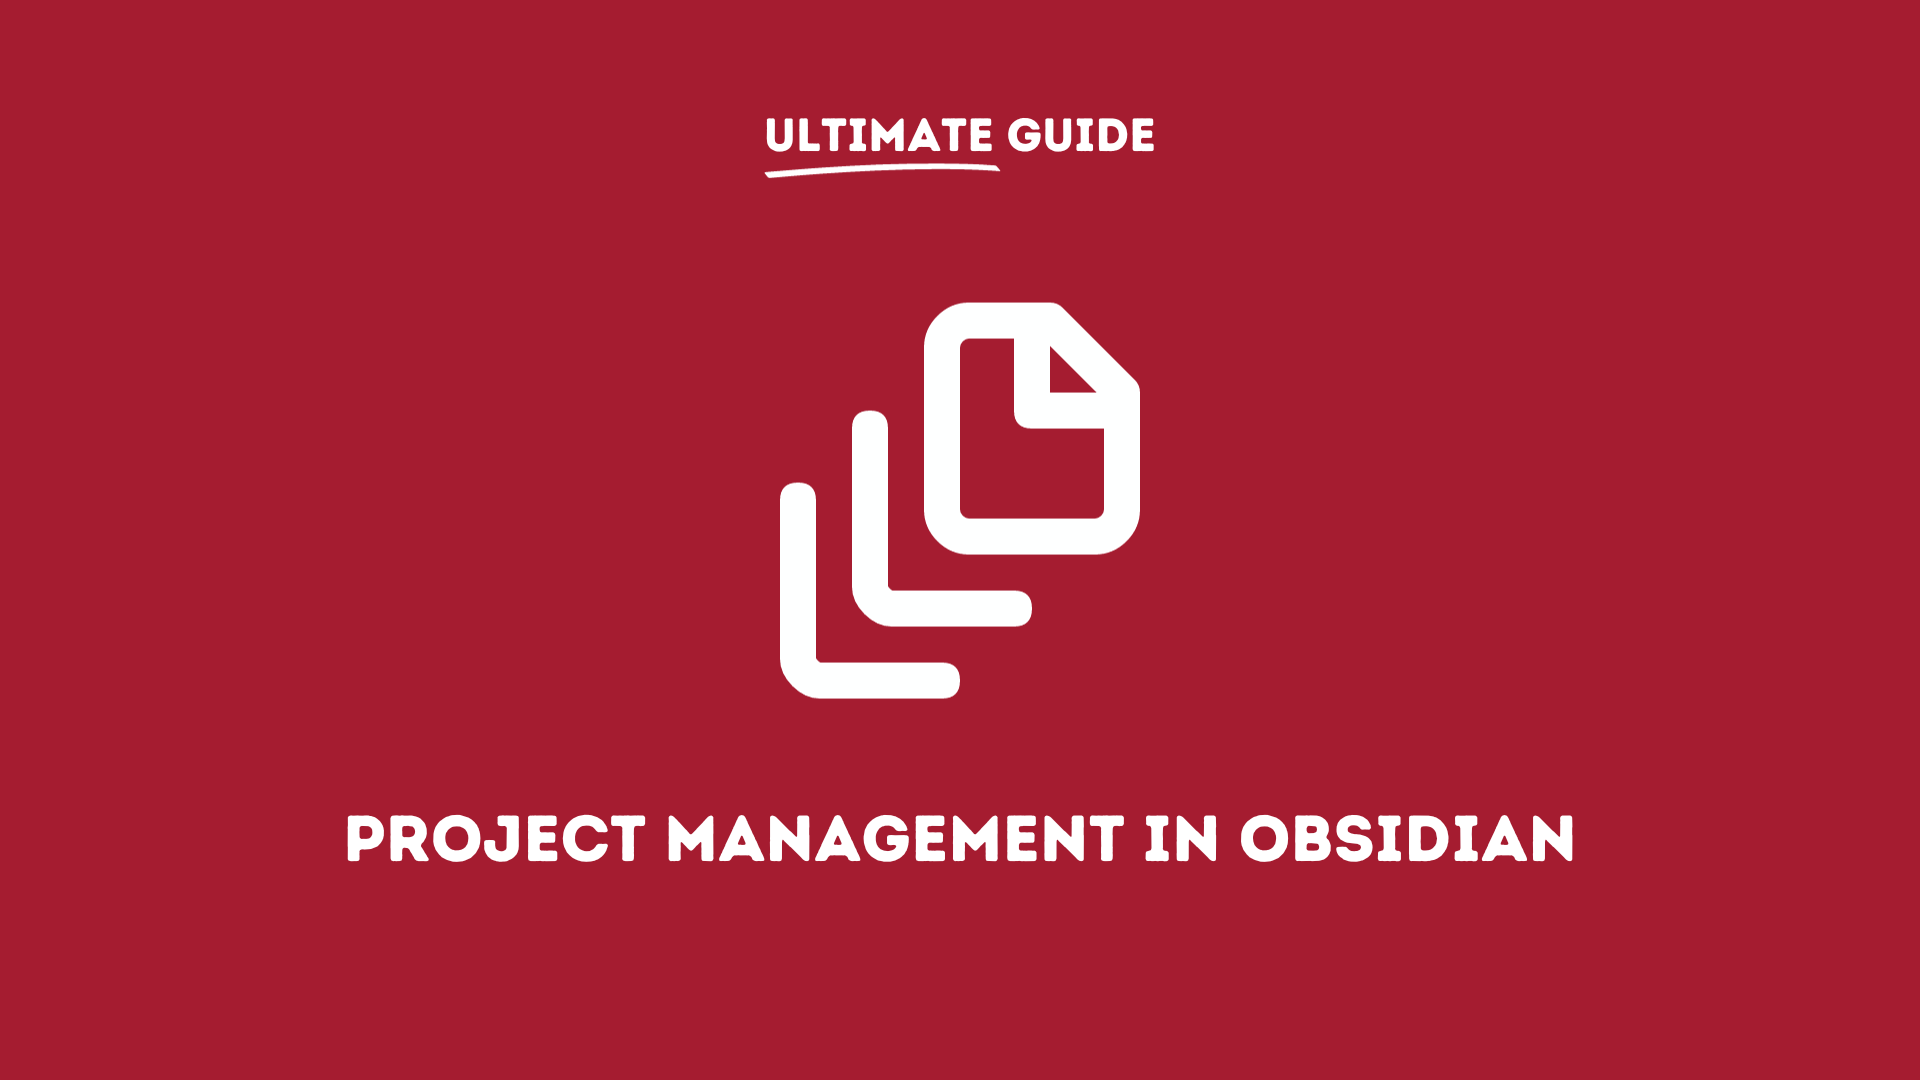 Ultimate Guide: Project Management in Obsidian